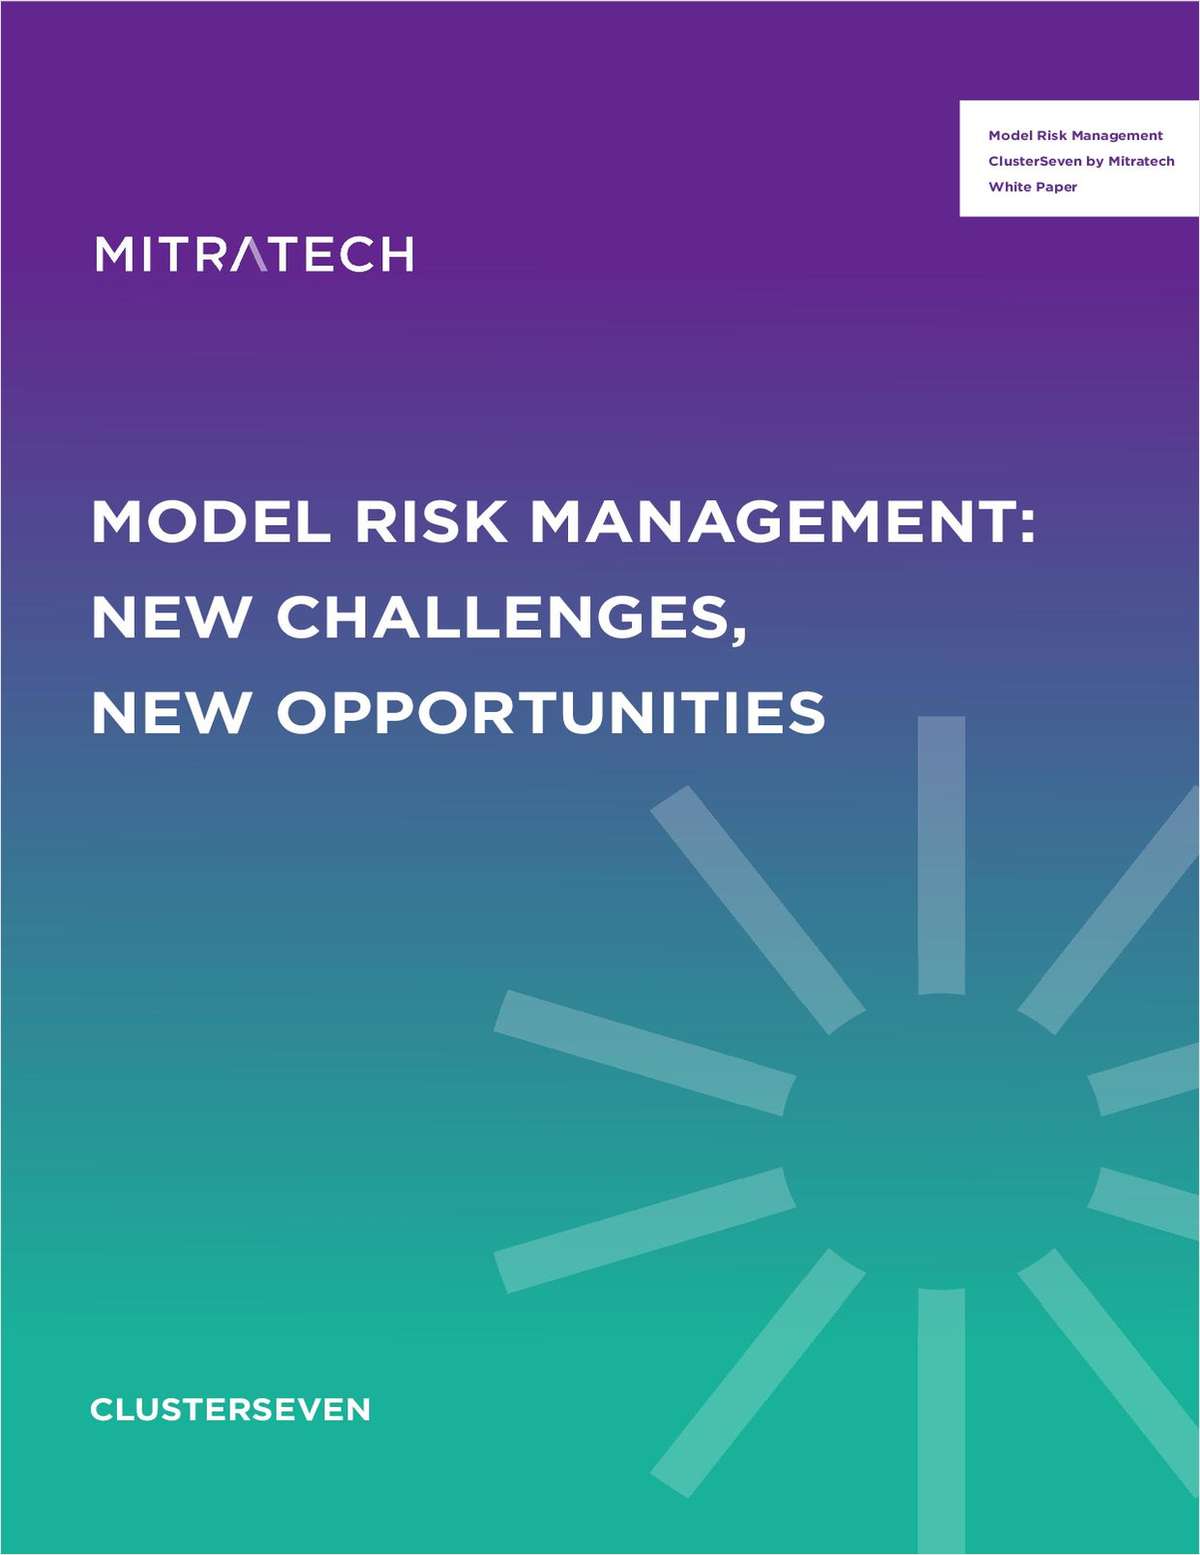 White Paper on Model Risk Management: New Challenges, New Opportunities